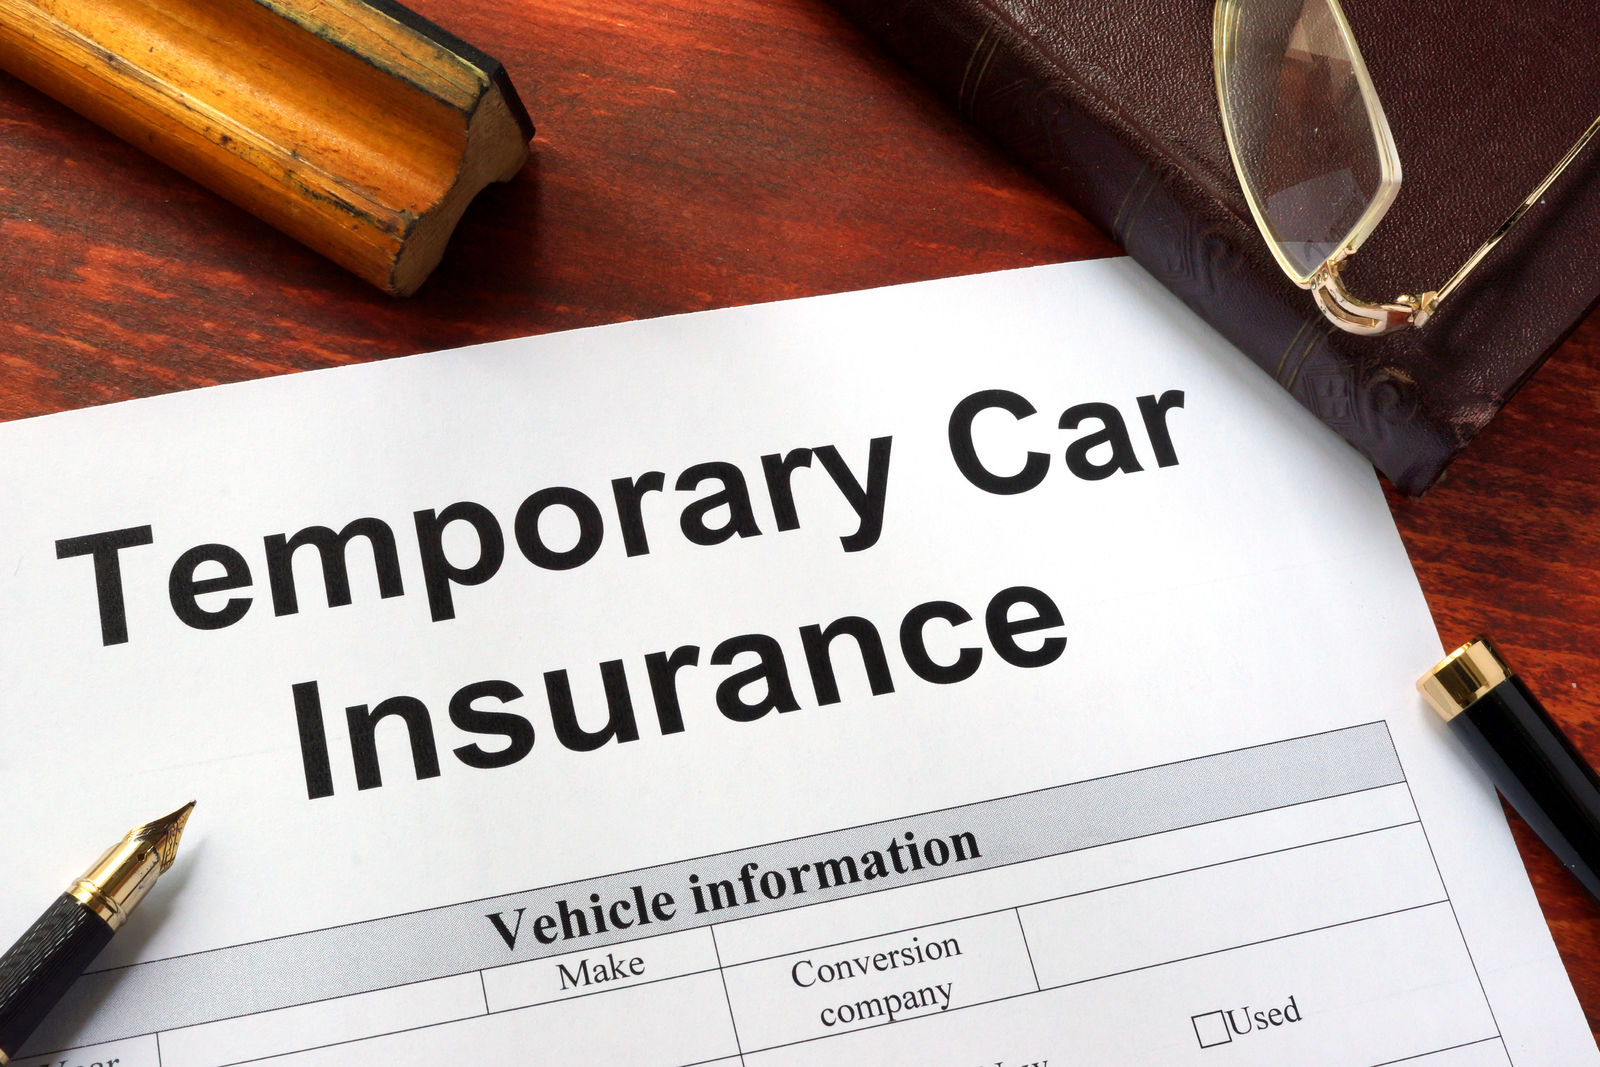 What is 7-day car insurance?